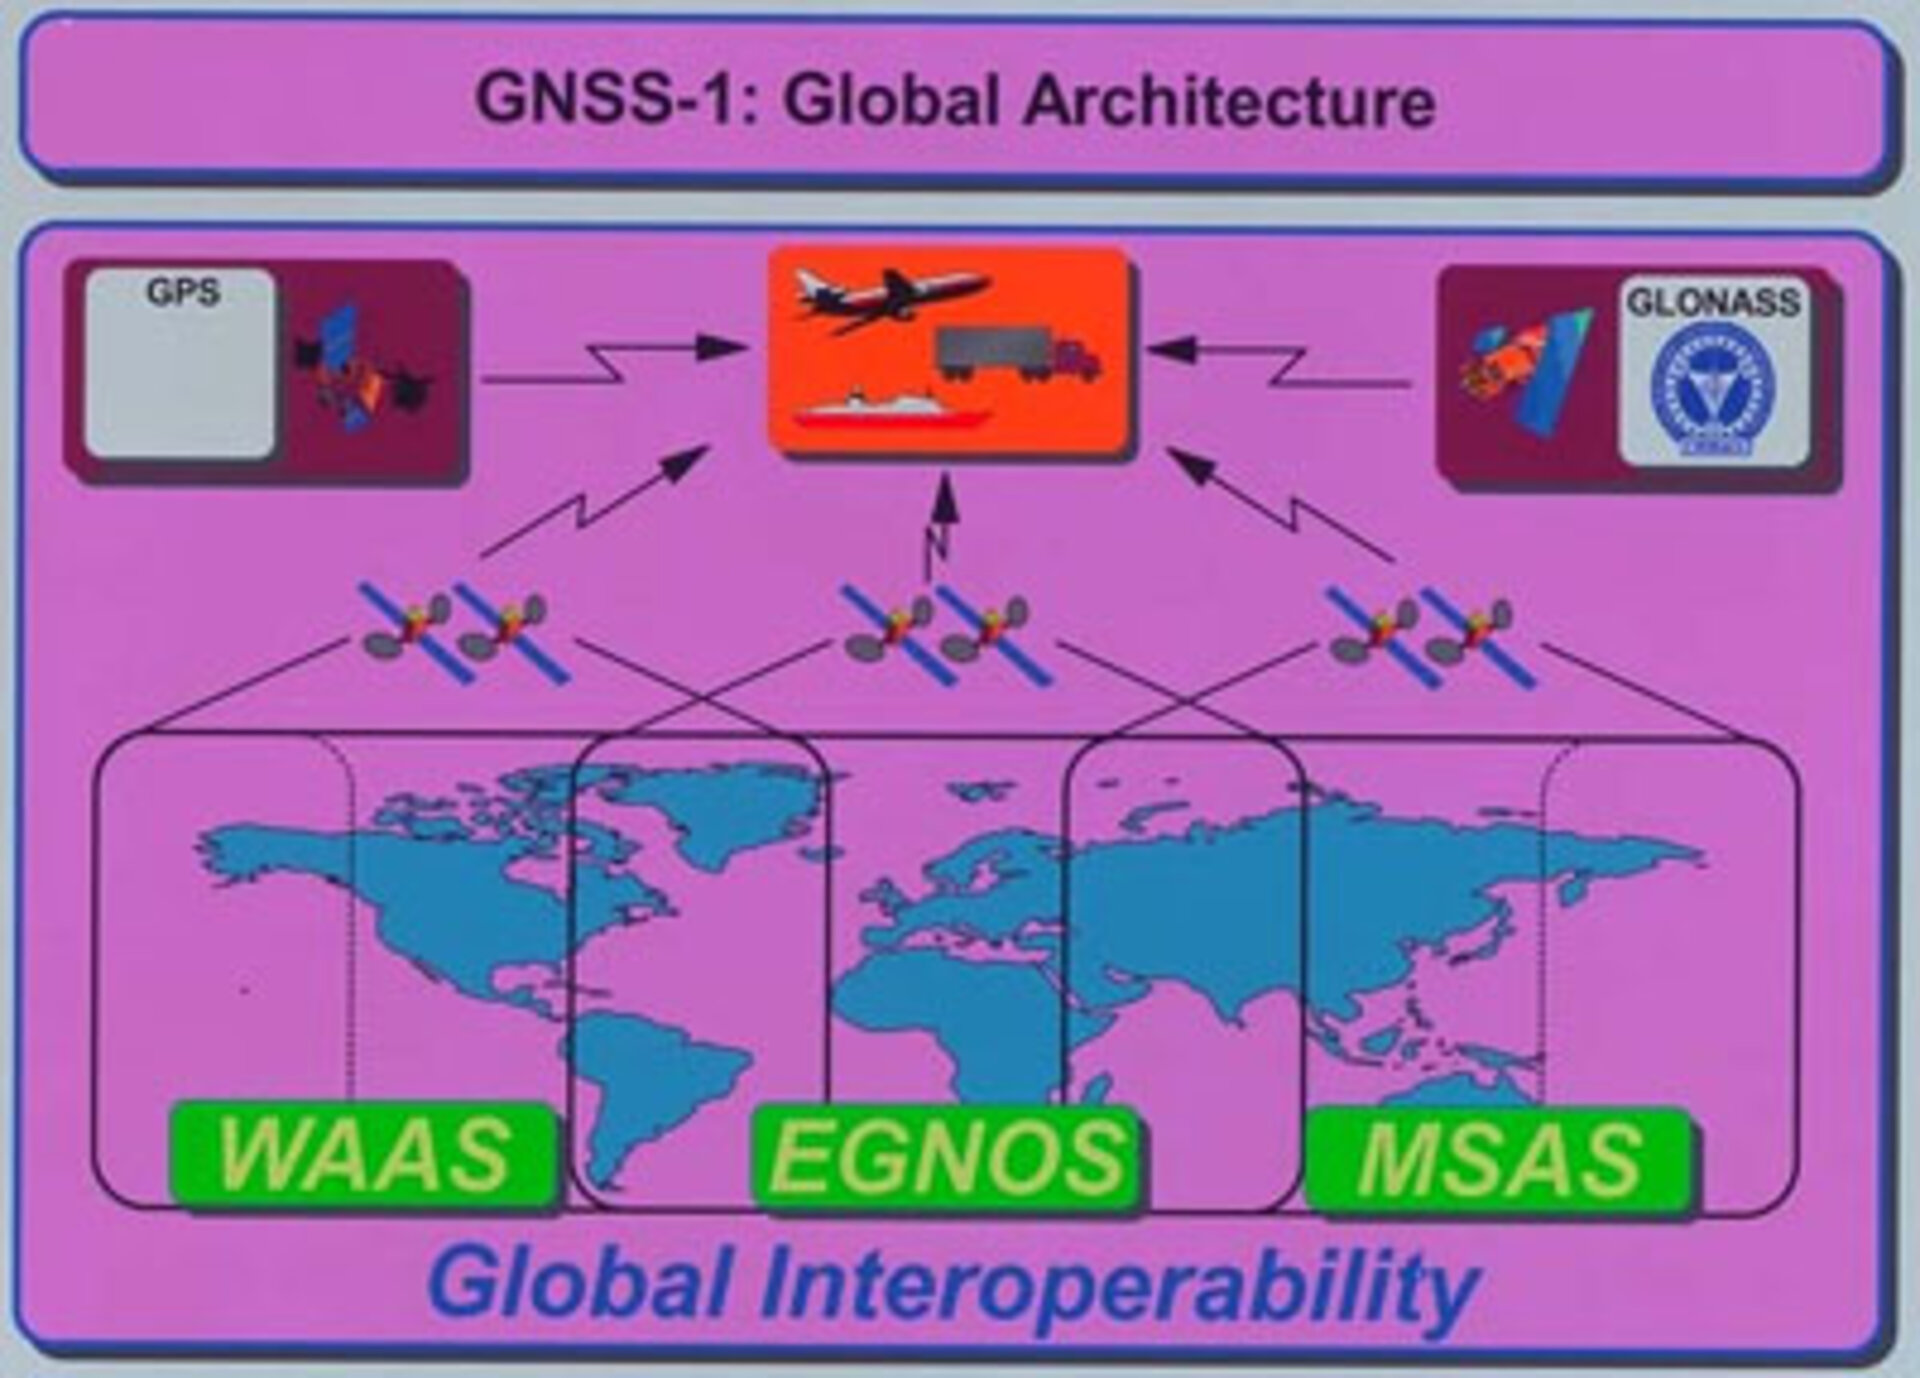 GNSS-1 architecture